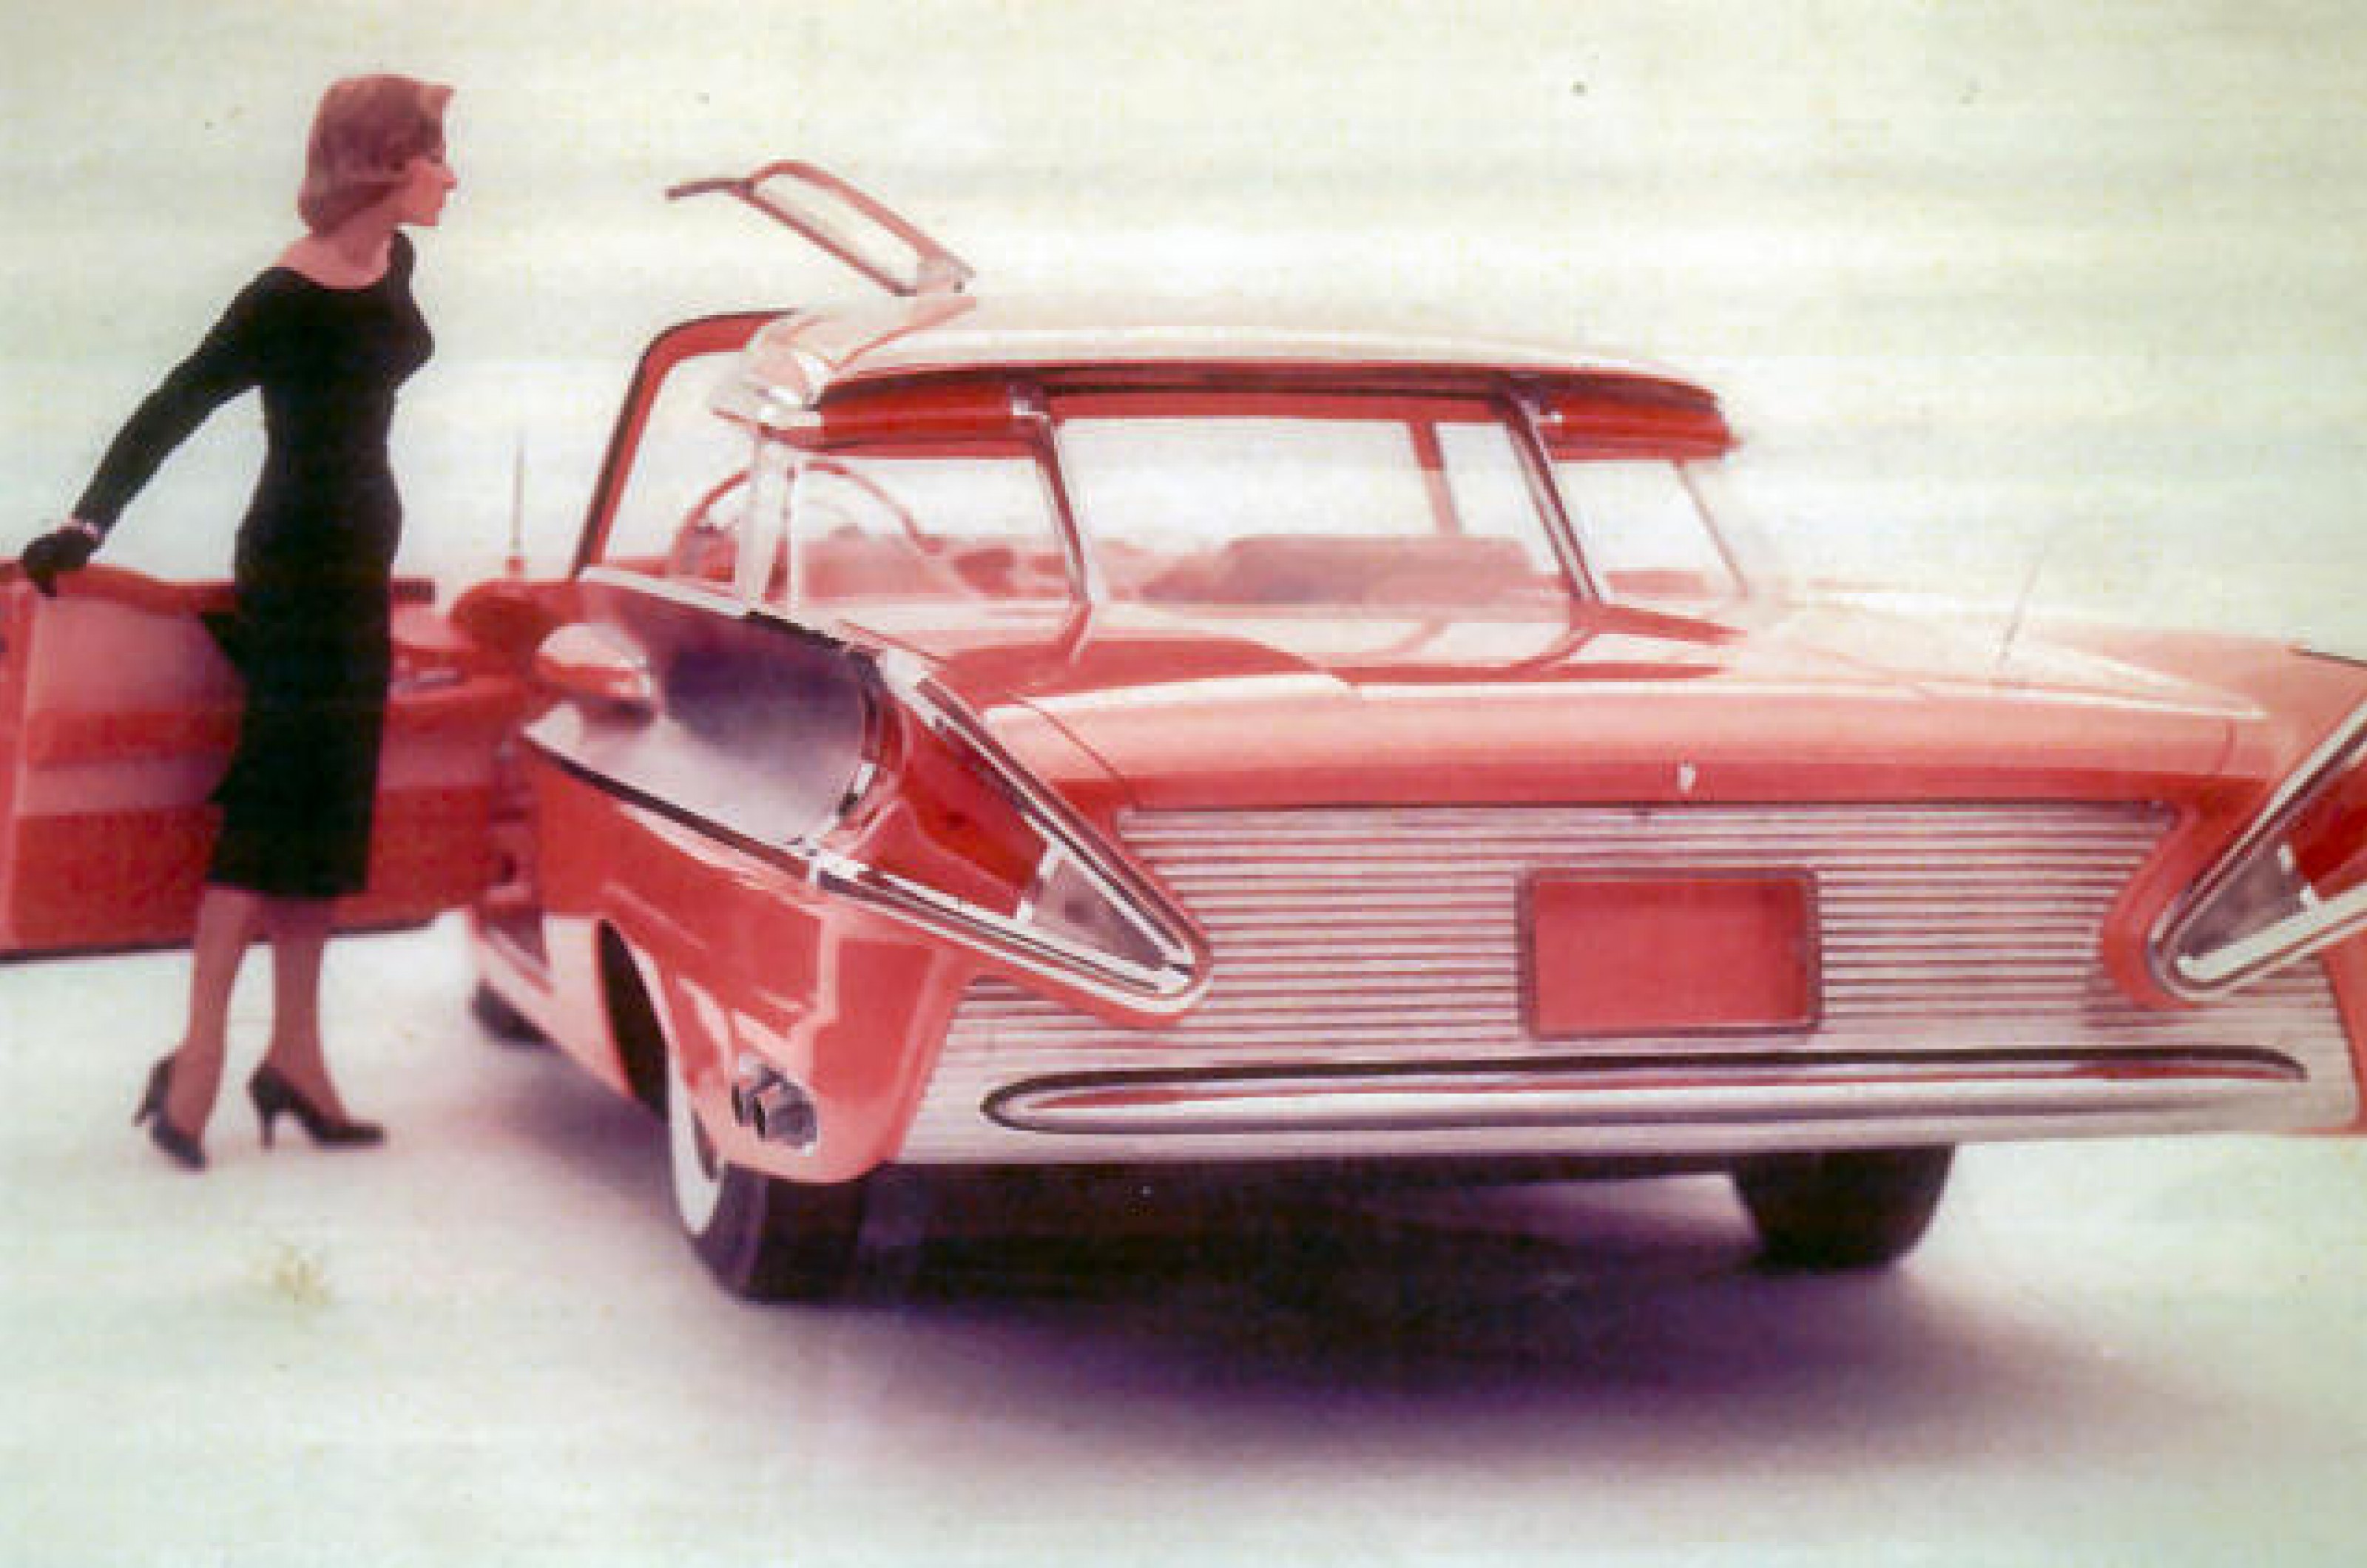 <p>Although the XM-Turnpike has conventional doors, it also has transparent butterfly roof panels that automatically raise and lower as the doors open and close via electric actuators.</p>  <p>From above, it looks like an early T-top design or a split sunroof.</p>  <p>Ghia created a single prototype using a 1954 Ford F250 chassis which reportedly cost around $80,000.</p>  <p>The Mercury XM-Turnpike then toured around America in a custom-built glass-paneled trailer, making appearances at the 1956 Cleveland Auto Show, as well as the Detroit, Chicago and New York motor shows.</p>  <p>The prototype was painted the factory color Persimmon and finished with a Pearlescent top coat.</p>  <p>While the concept had several ambitious, futuristic elements, the Mercury Turnpike Cruiser made it into production for the 1957 model year, a slightly simplified version of the show car.</p>